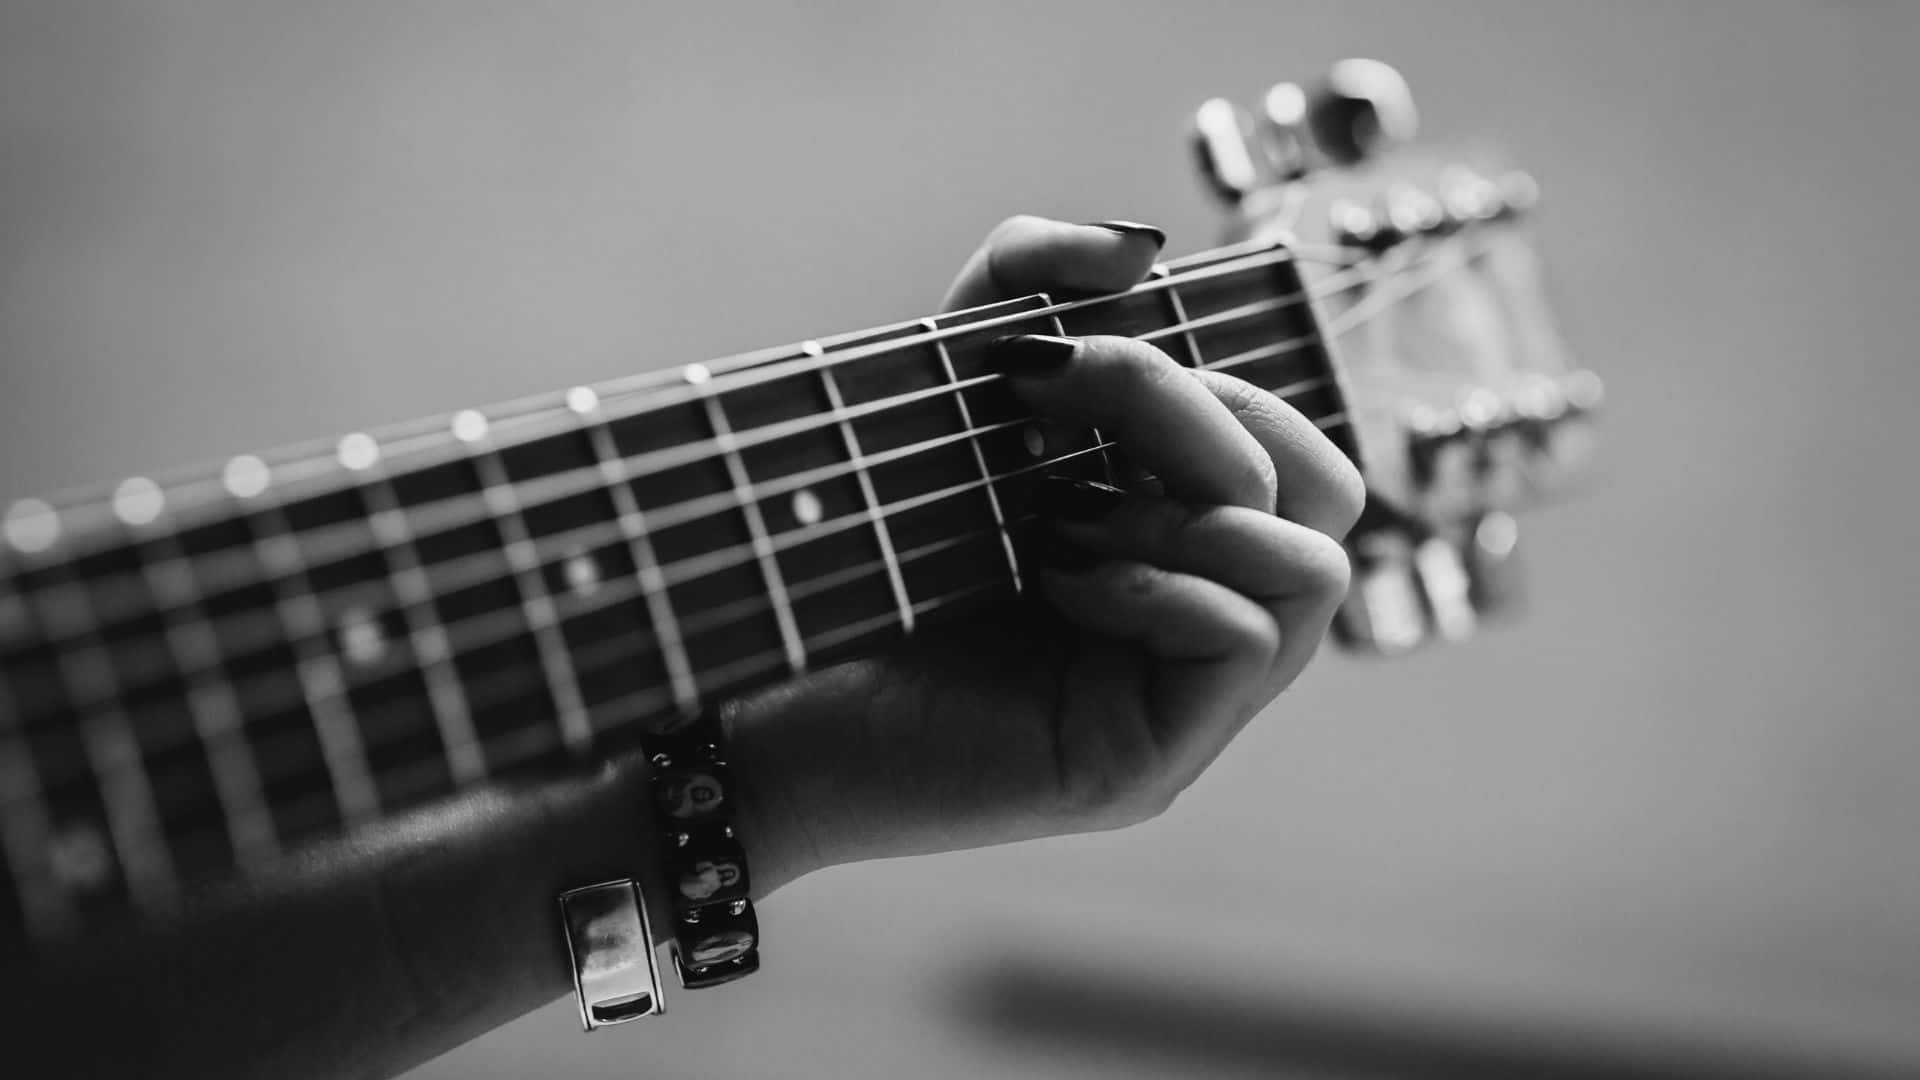 Download Black and White Guitar Wall Art Wallpaper | Wallpapers.com